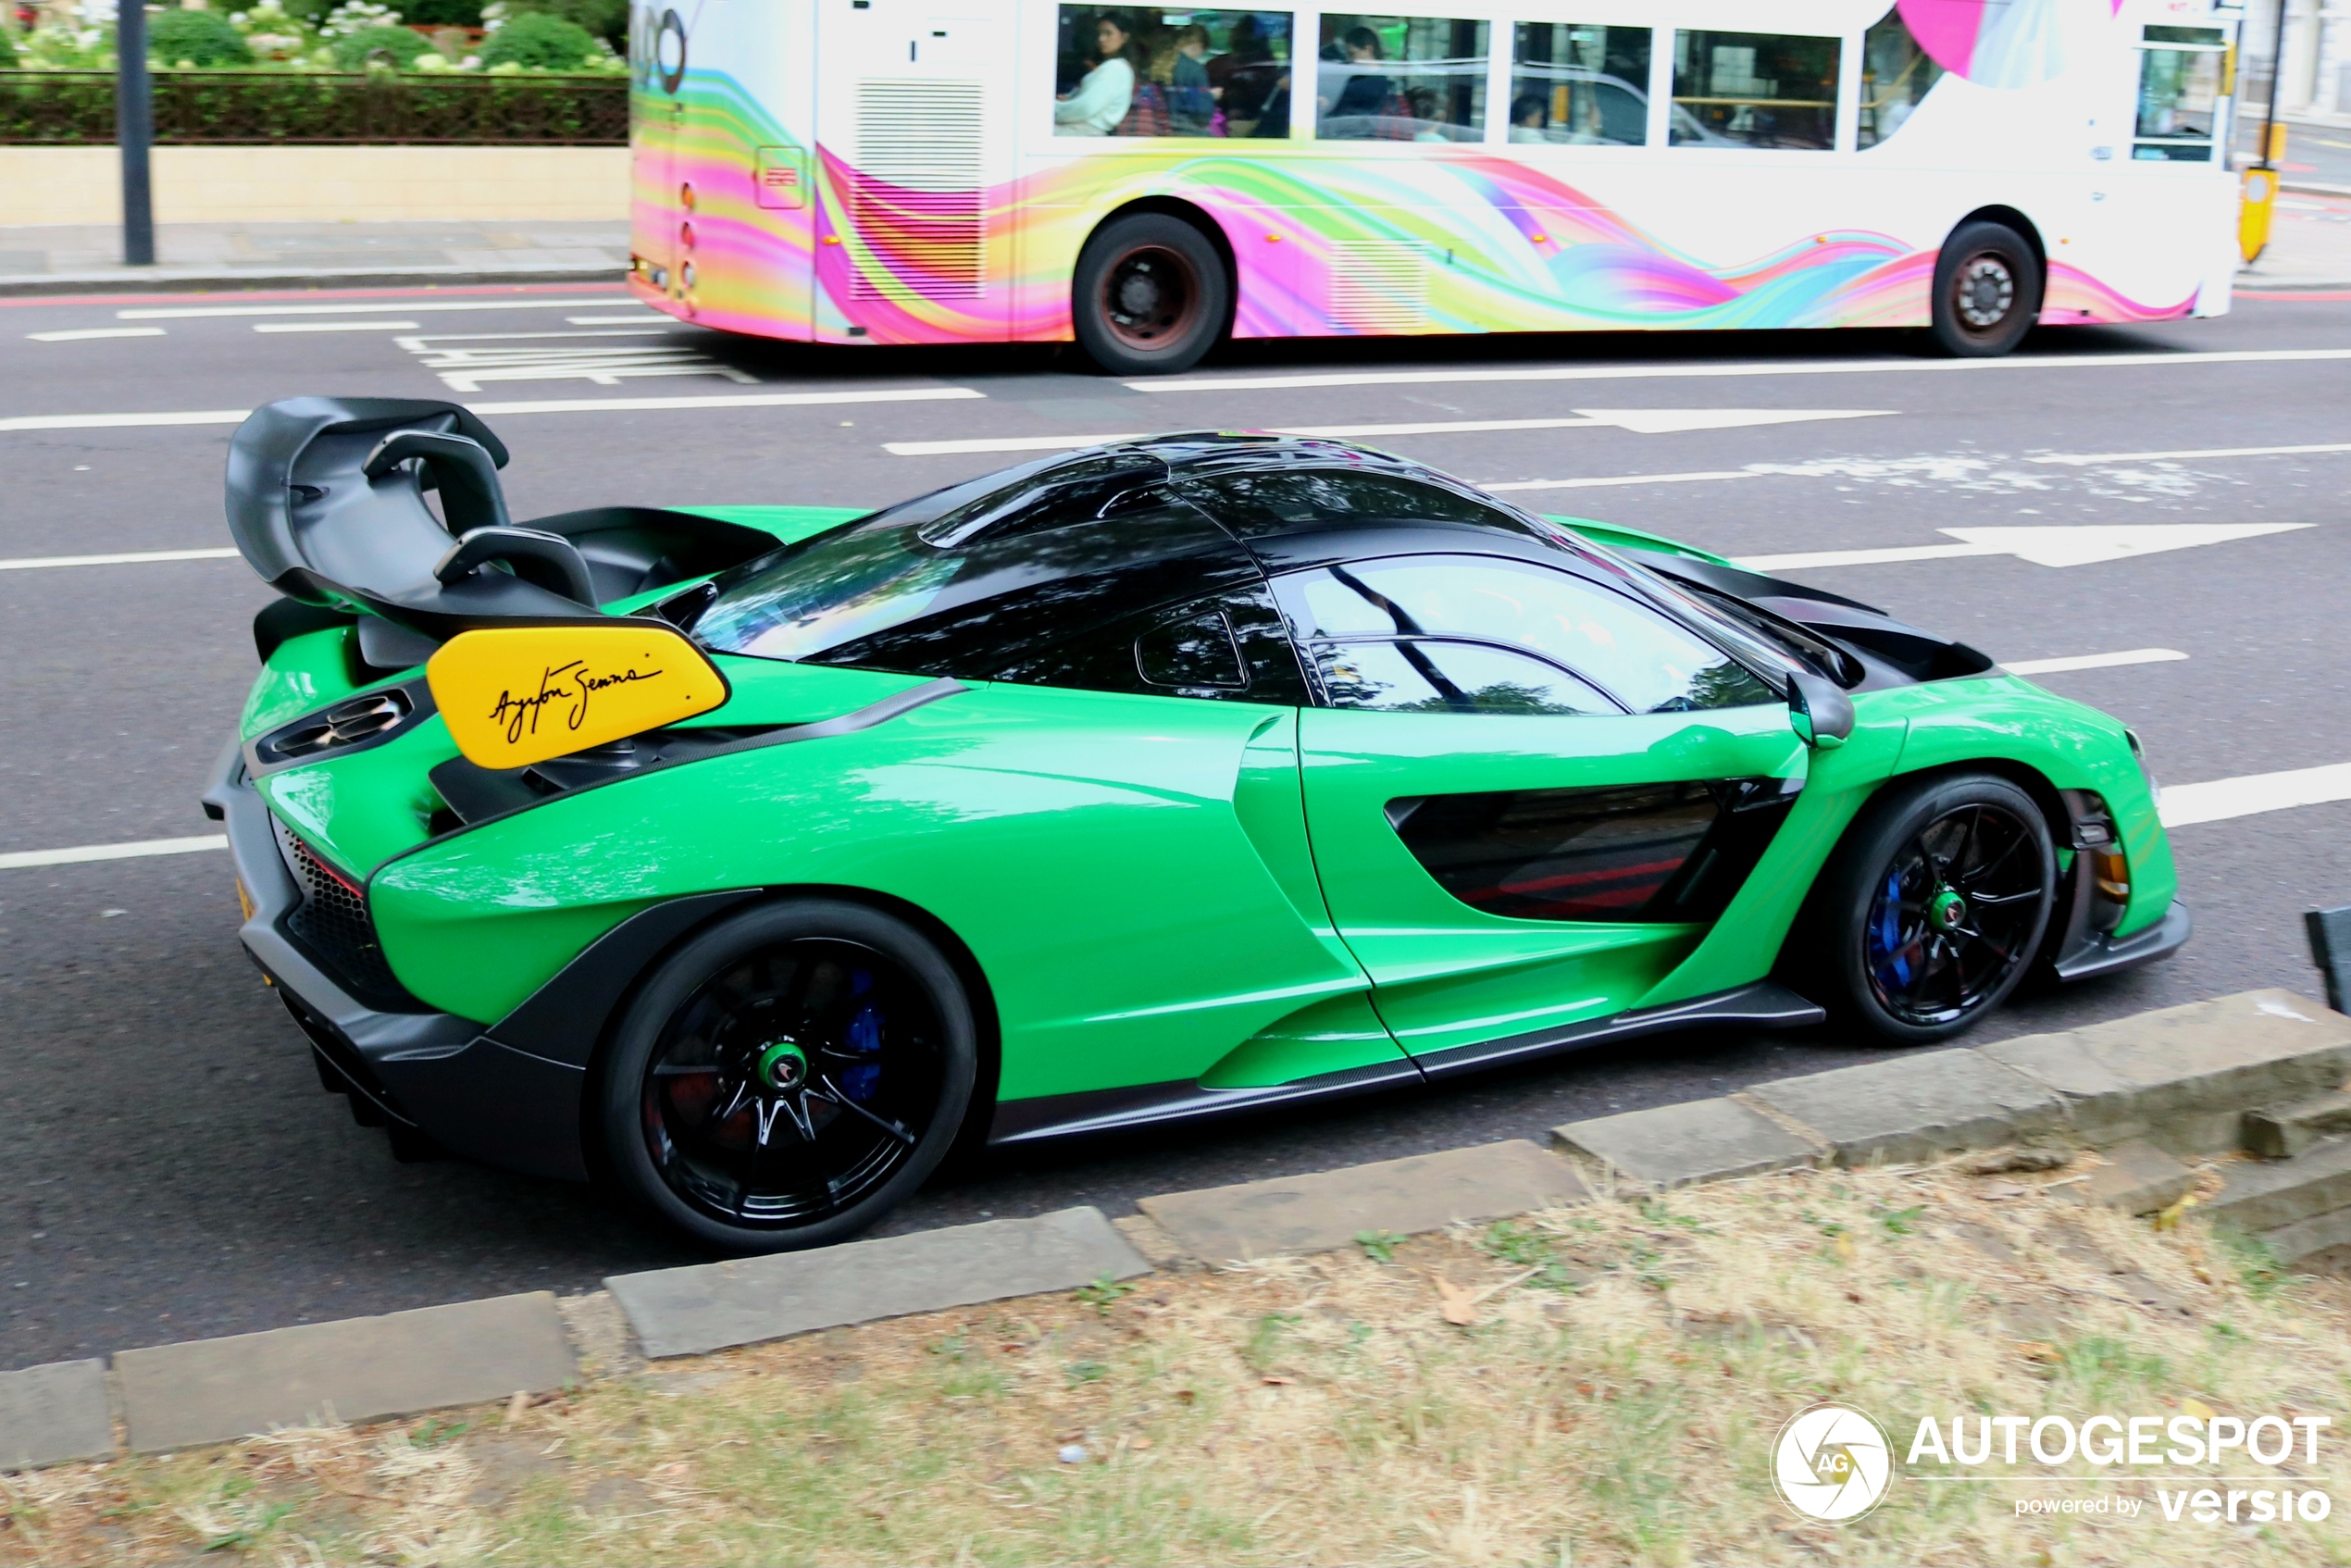 A new Senna shows up in London